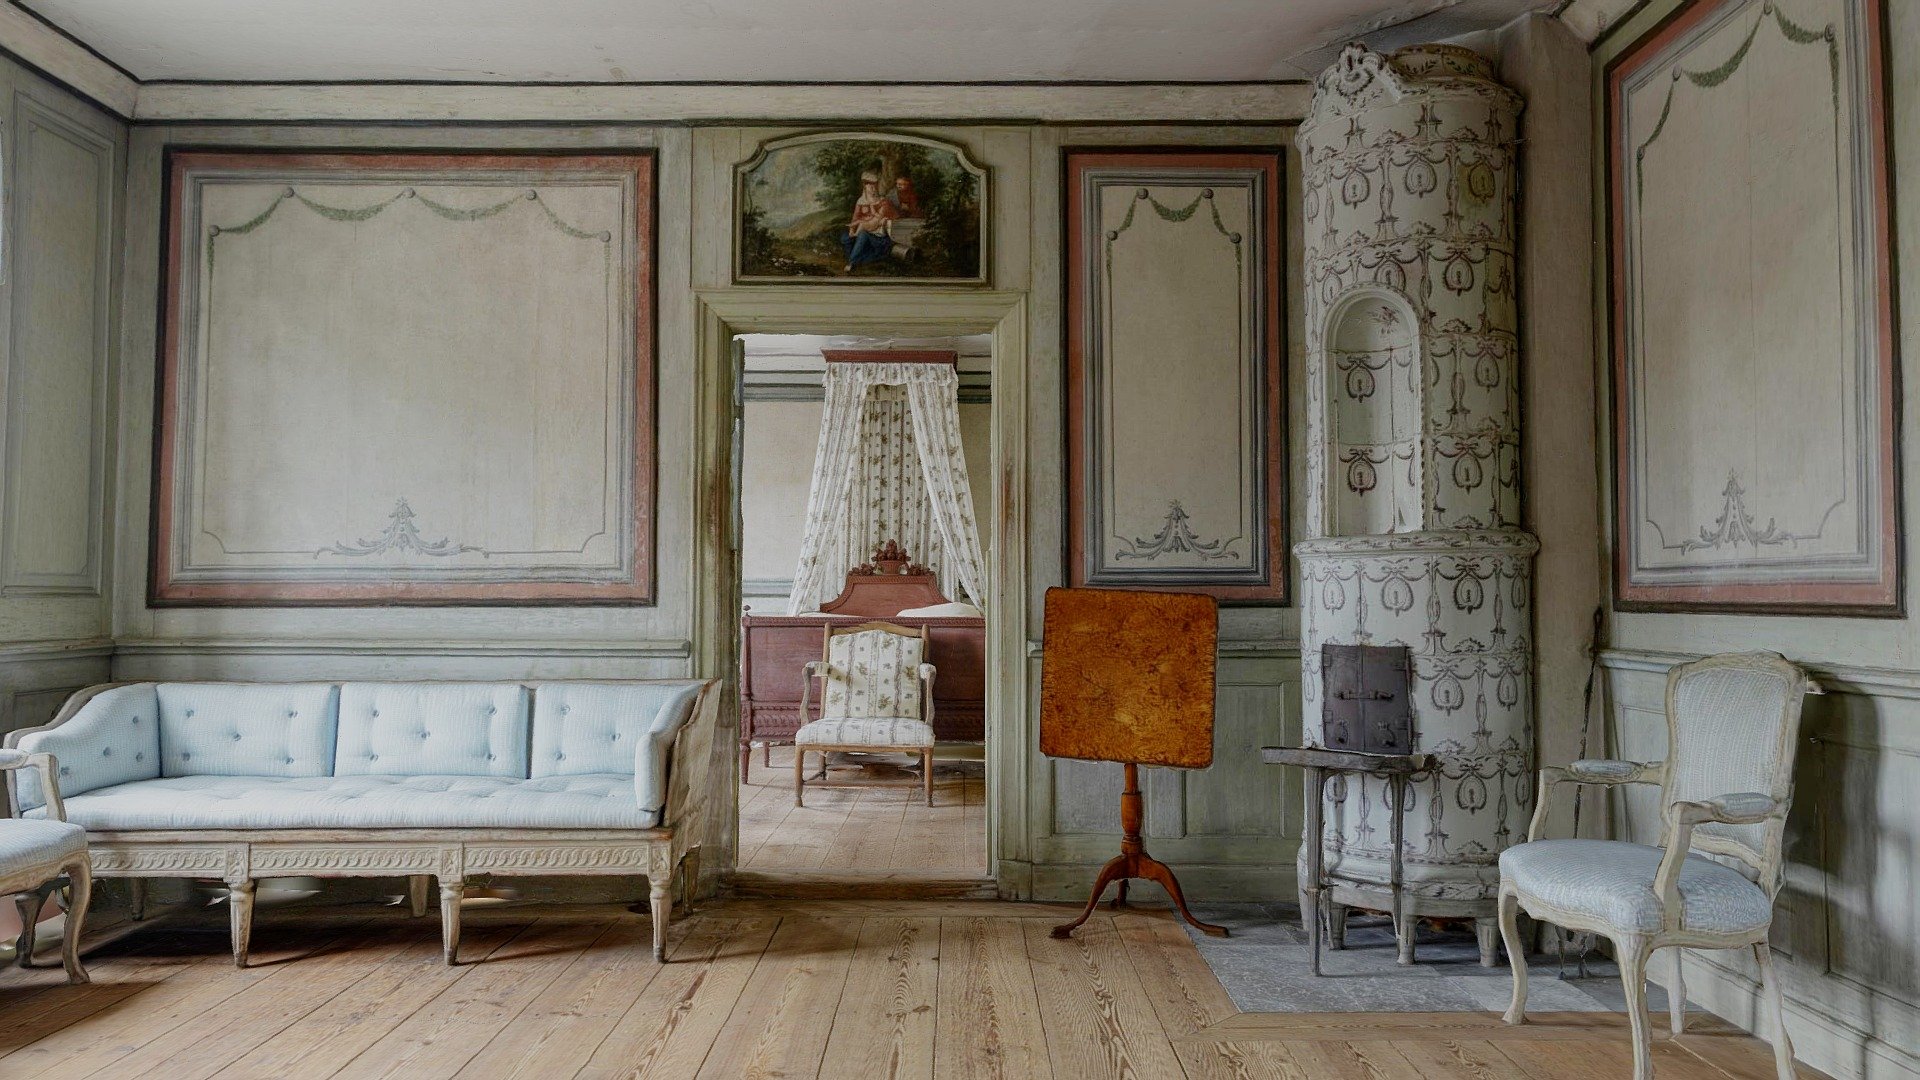 The Baroness’ antechamber and bedroom, are both decorated and furnished in Gustavian style with some details of an older character Rococo style. So e.g. are the door tops from the middle of the 18th century, and the armchairs in the antechamber as well as the gilded console table between the windows are characterized by Rococo line play. The antechamber table is signed by Lars Nordin and the hammer piano by Pehr Lindholm, both in Stockholm.
In the bedchamber, the main object is a pull-out bed with curtains of printed linen fabric (reprint after original in Stockholm Castle). The bed is painted in a reddish-brown color, which apparently wants to give the illusion of mahogany. On the cloth-covered dressing table, which is a reconstruction with the guidance of contemporary,  cans and bottles of paintings typical of the time, stand in front of a simple mirror from 1794. 

This model is produced by Virtualsweden AB for Skansen - The Baroness´s antechamber Skogaholm manor - 3D model by Virtualsweden 3d model